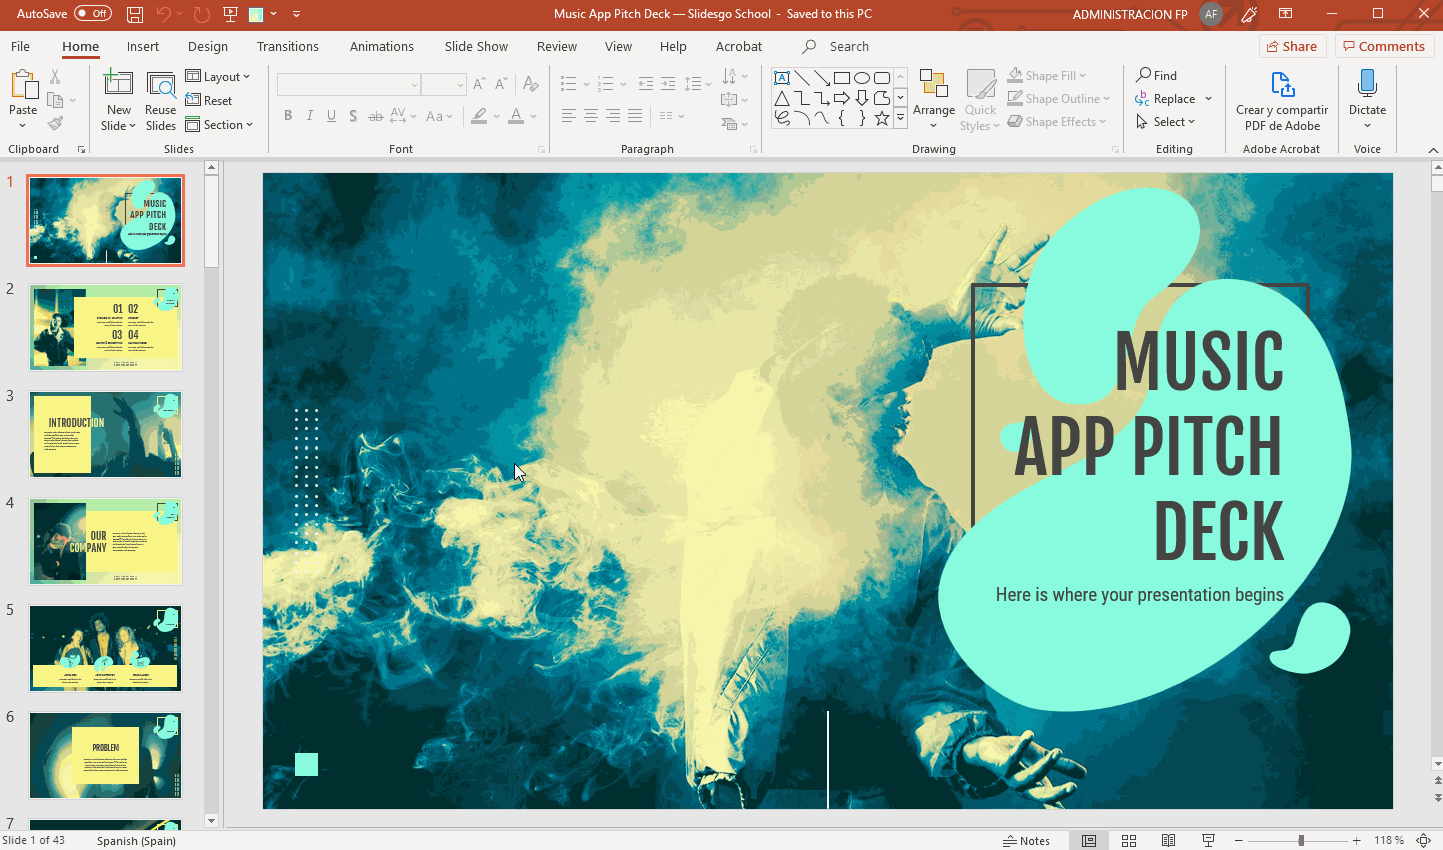 How to Add, Record or Edit Audio or Music in PowerPoint -2